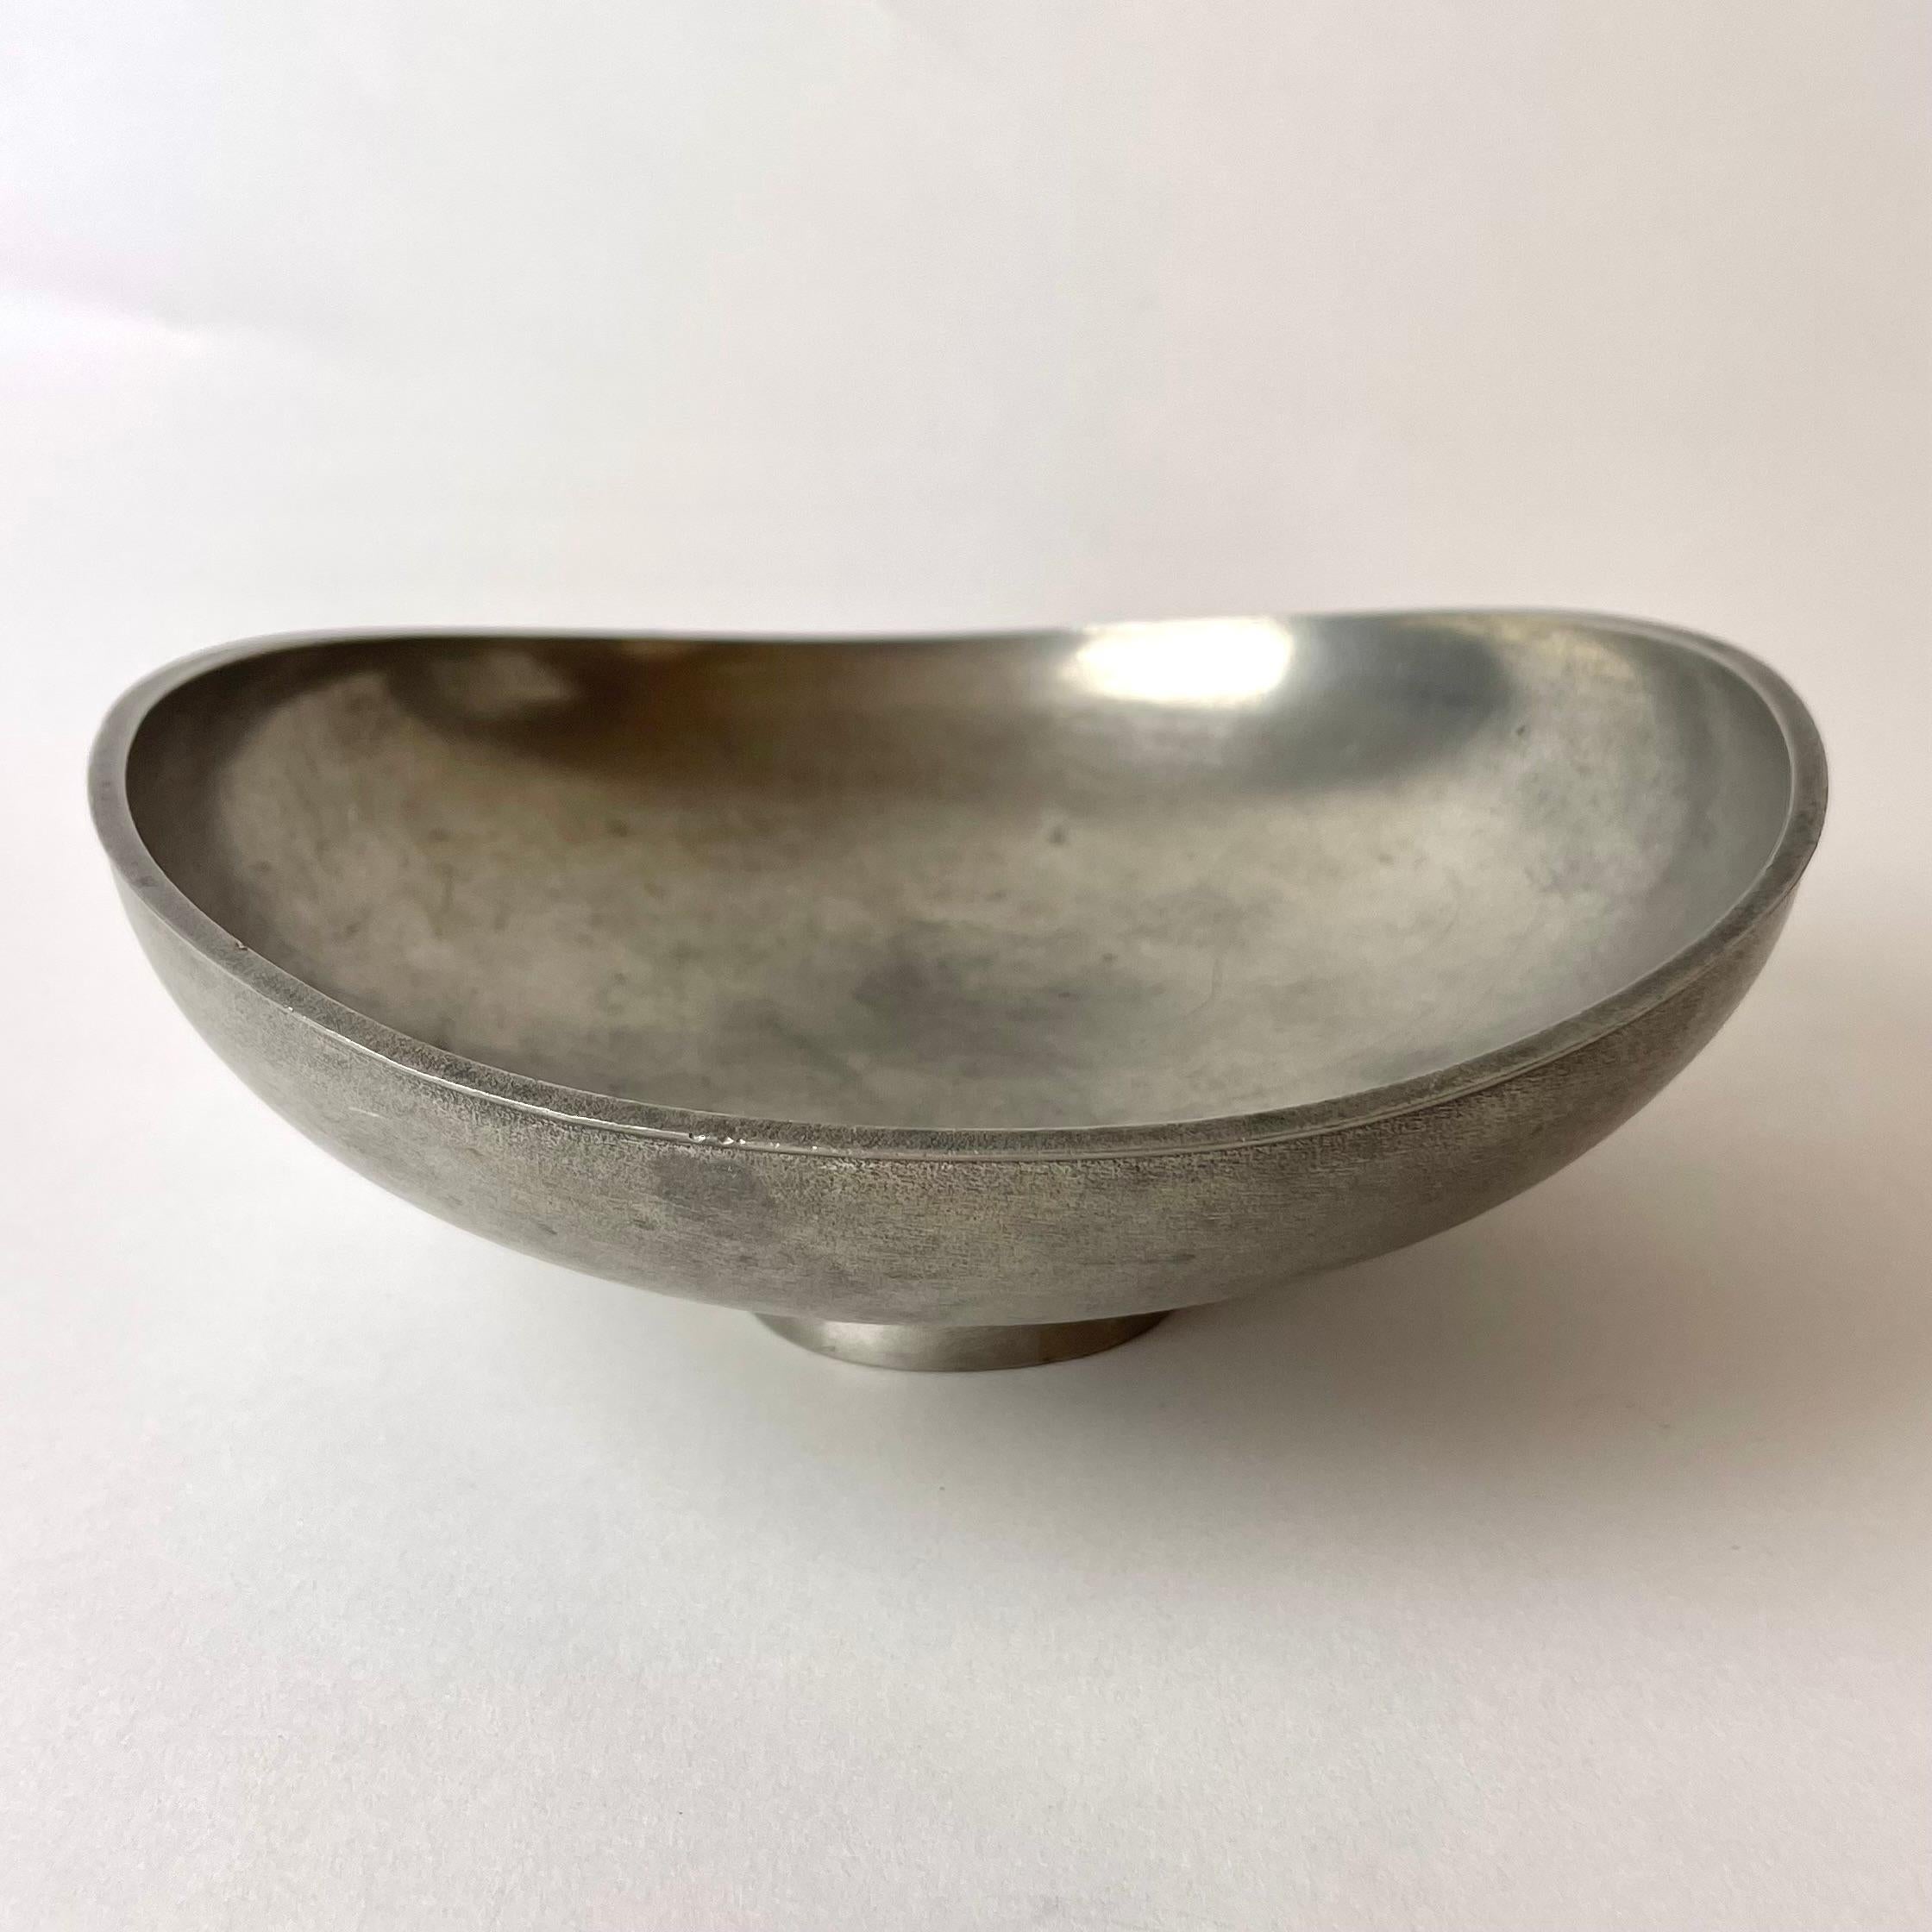 Pewter fruit bowl designed by Edvin Ollers, Sweden. Mid-20th Century 1